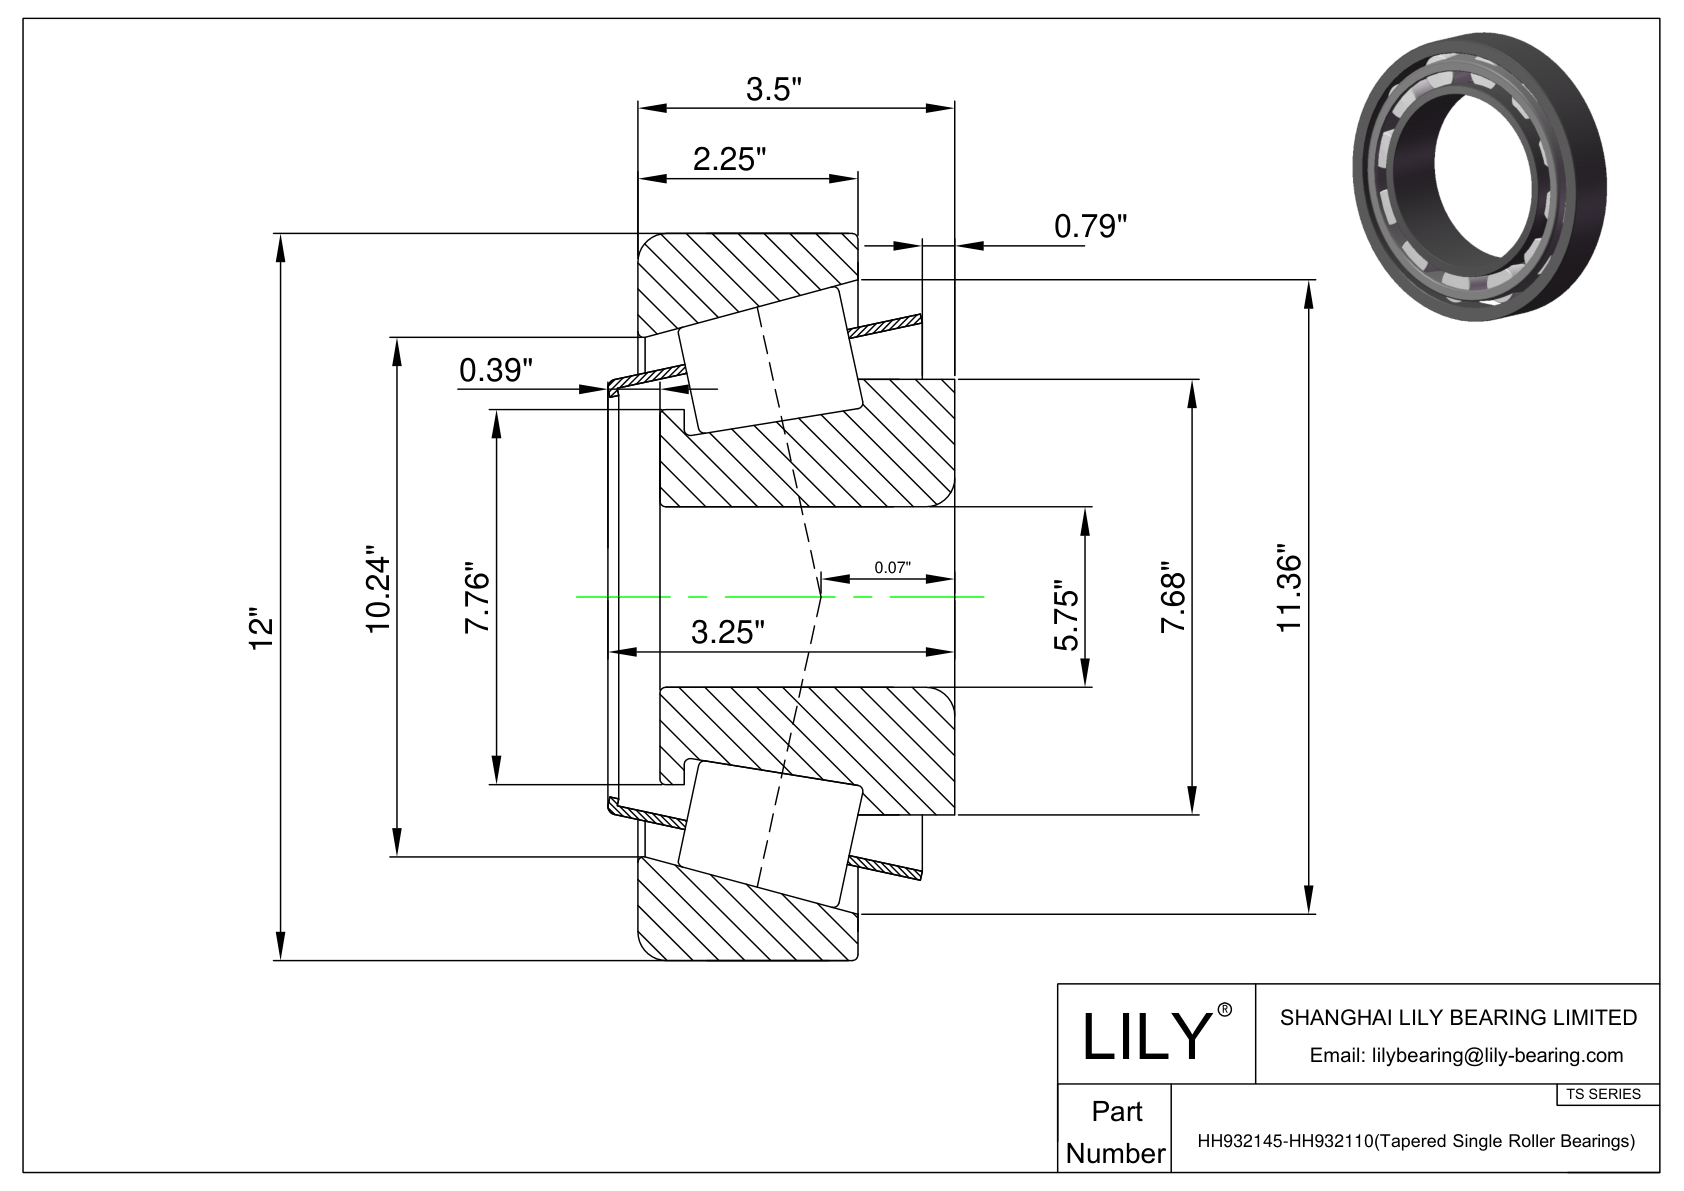 HH932145-HH932110 TS (Tapered Single Roller Bearings) (Imperial) cad drawing